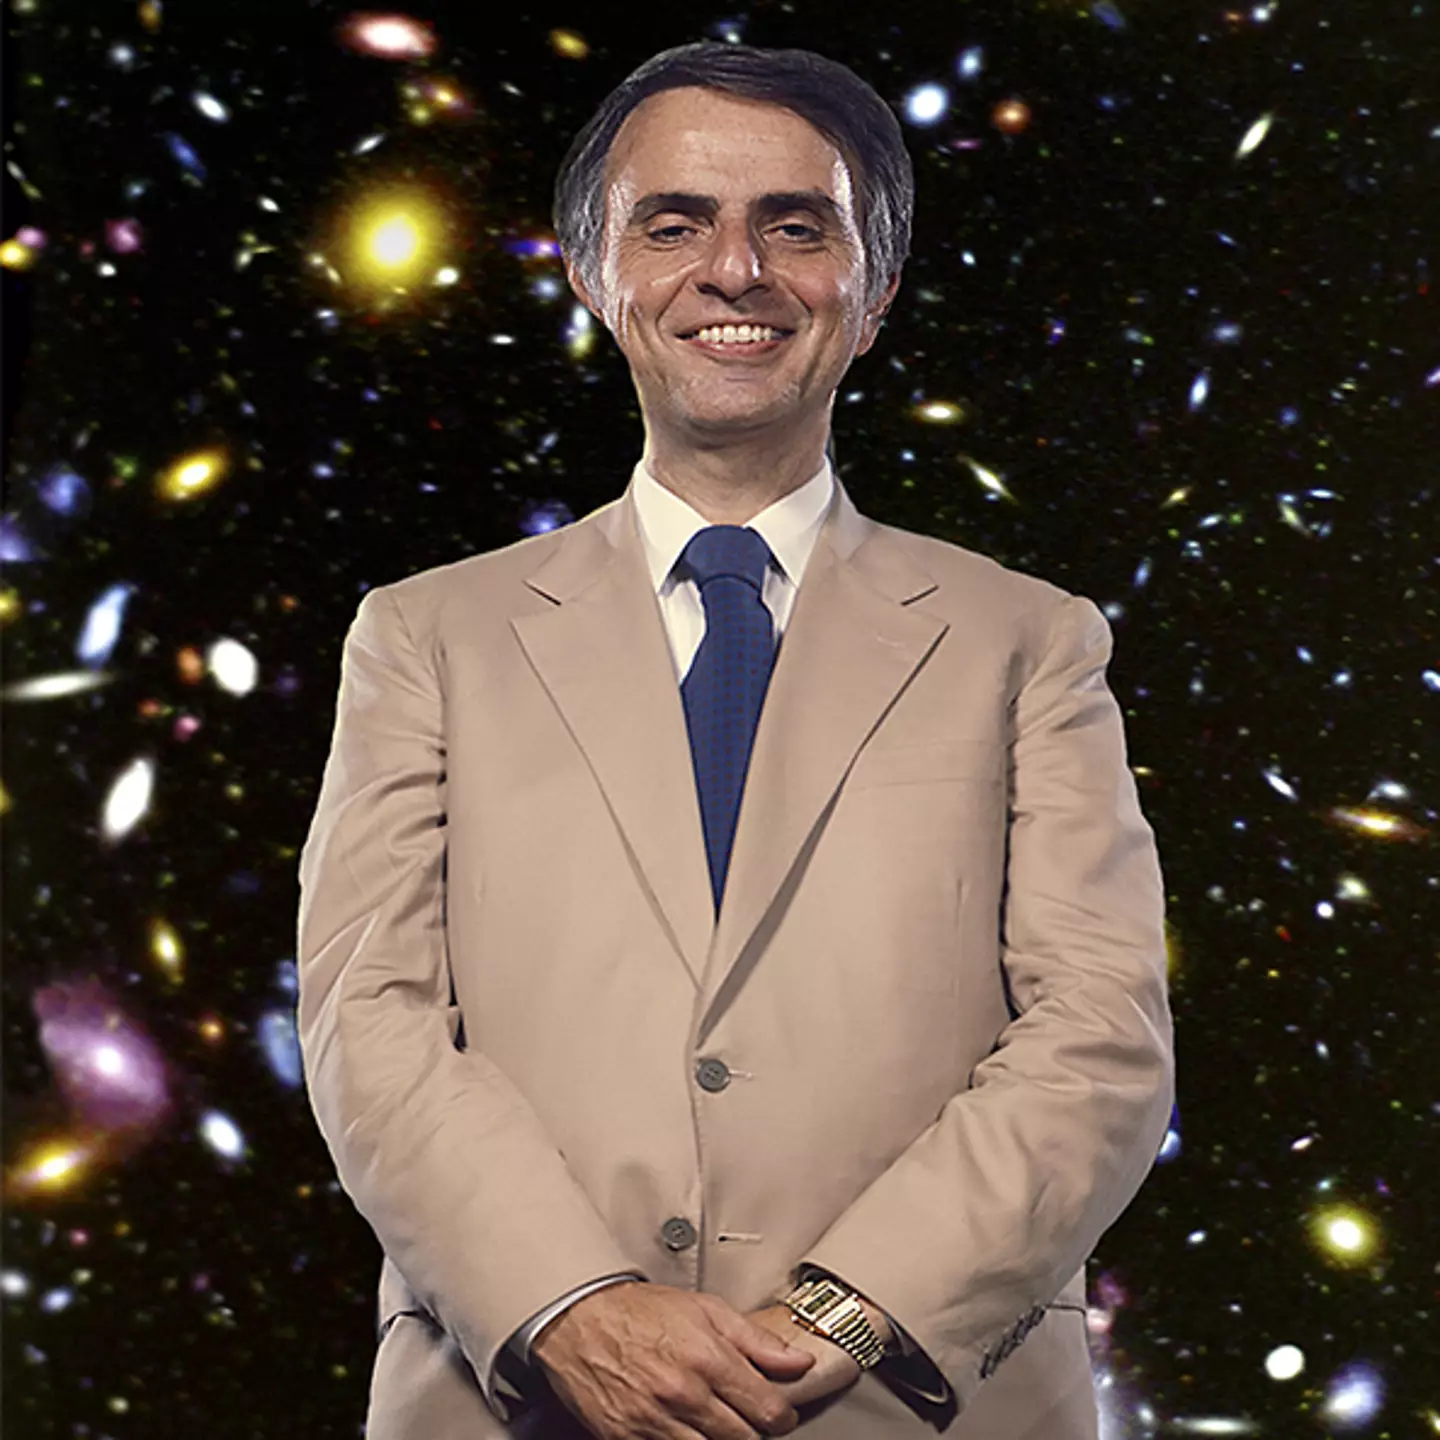 Astronomer Carl Sagan left inspiring message for the first humans on Mars before he died